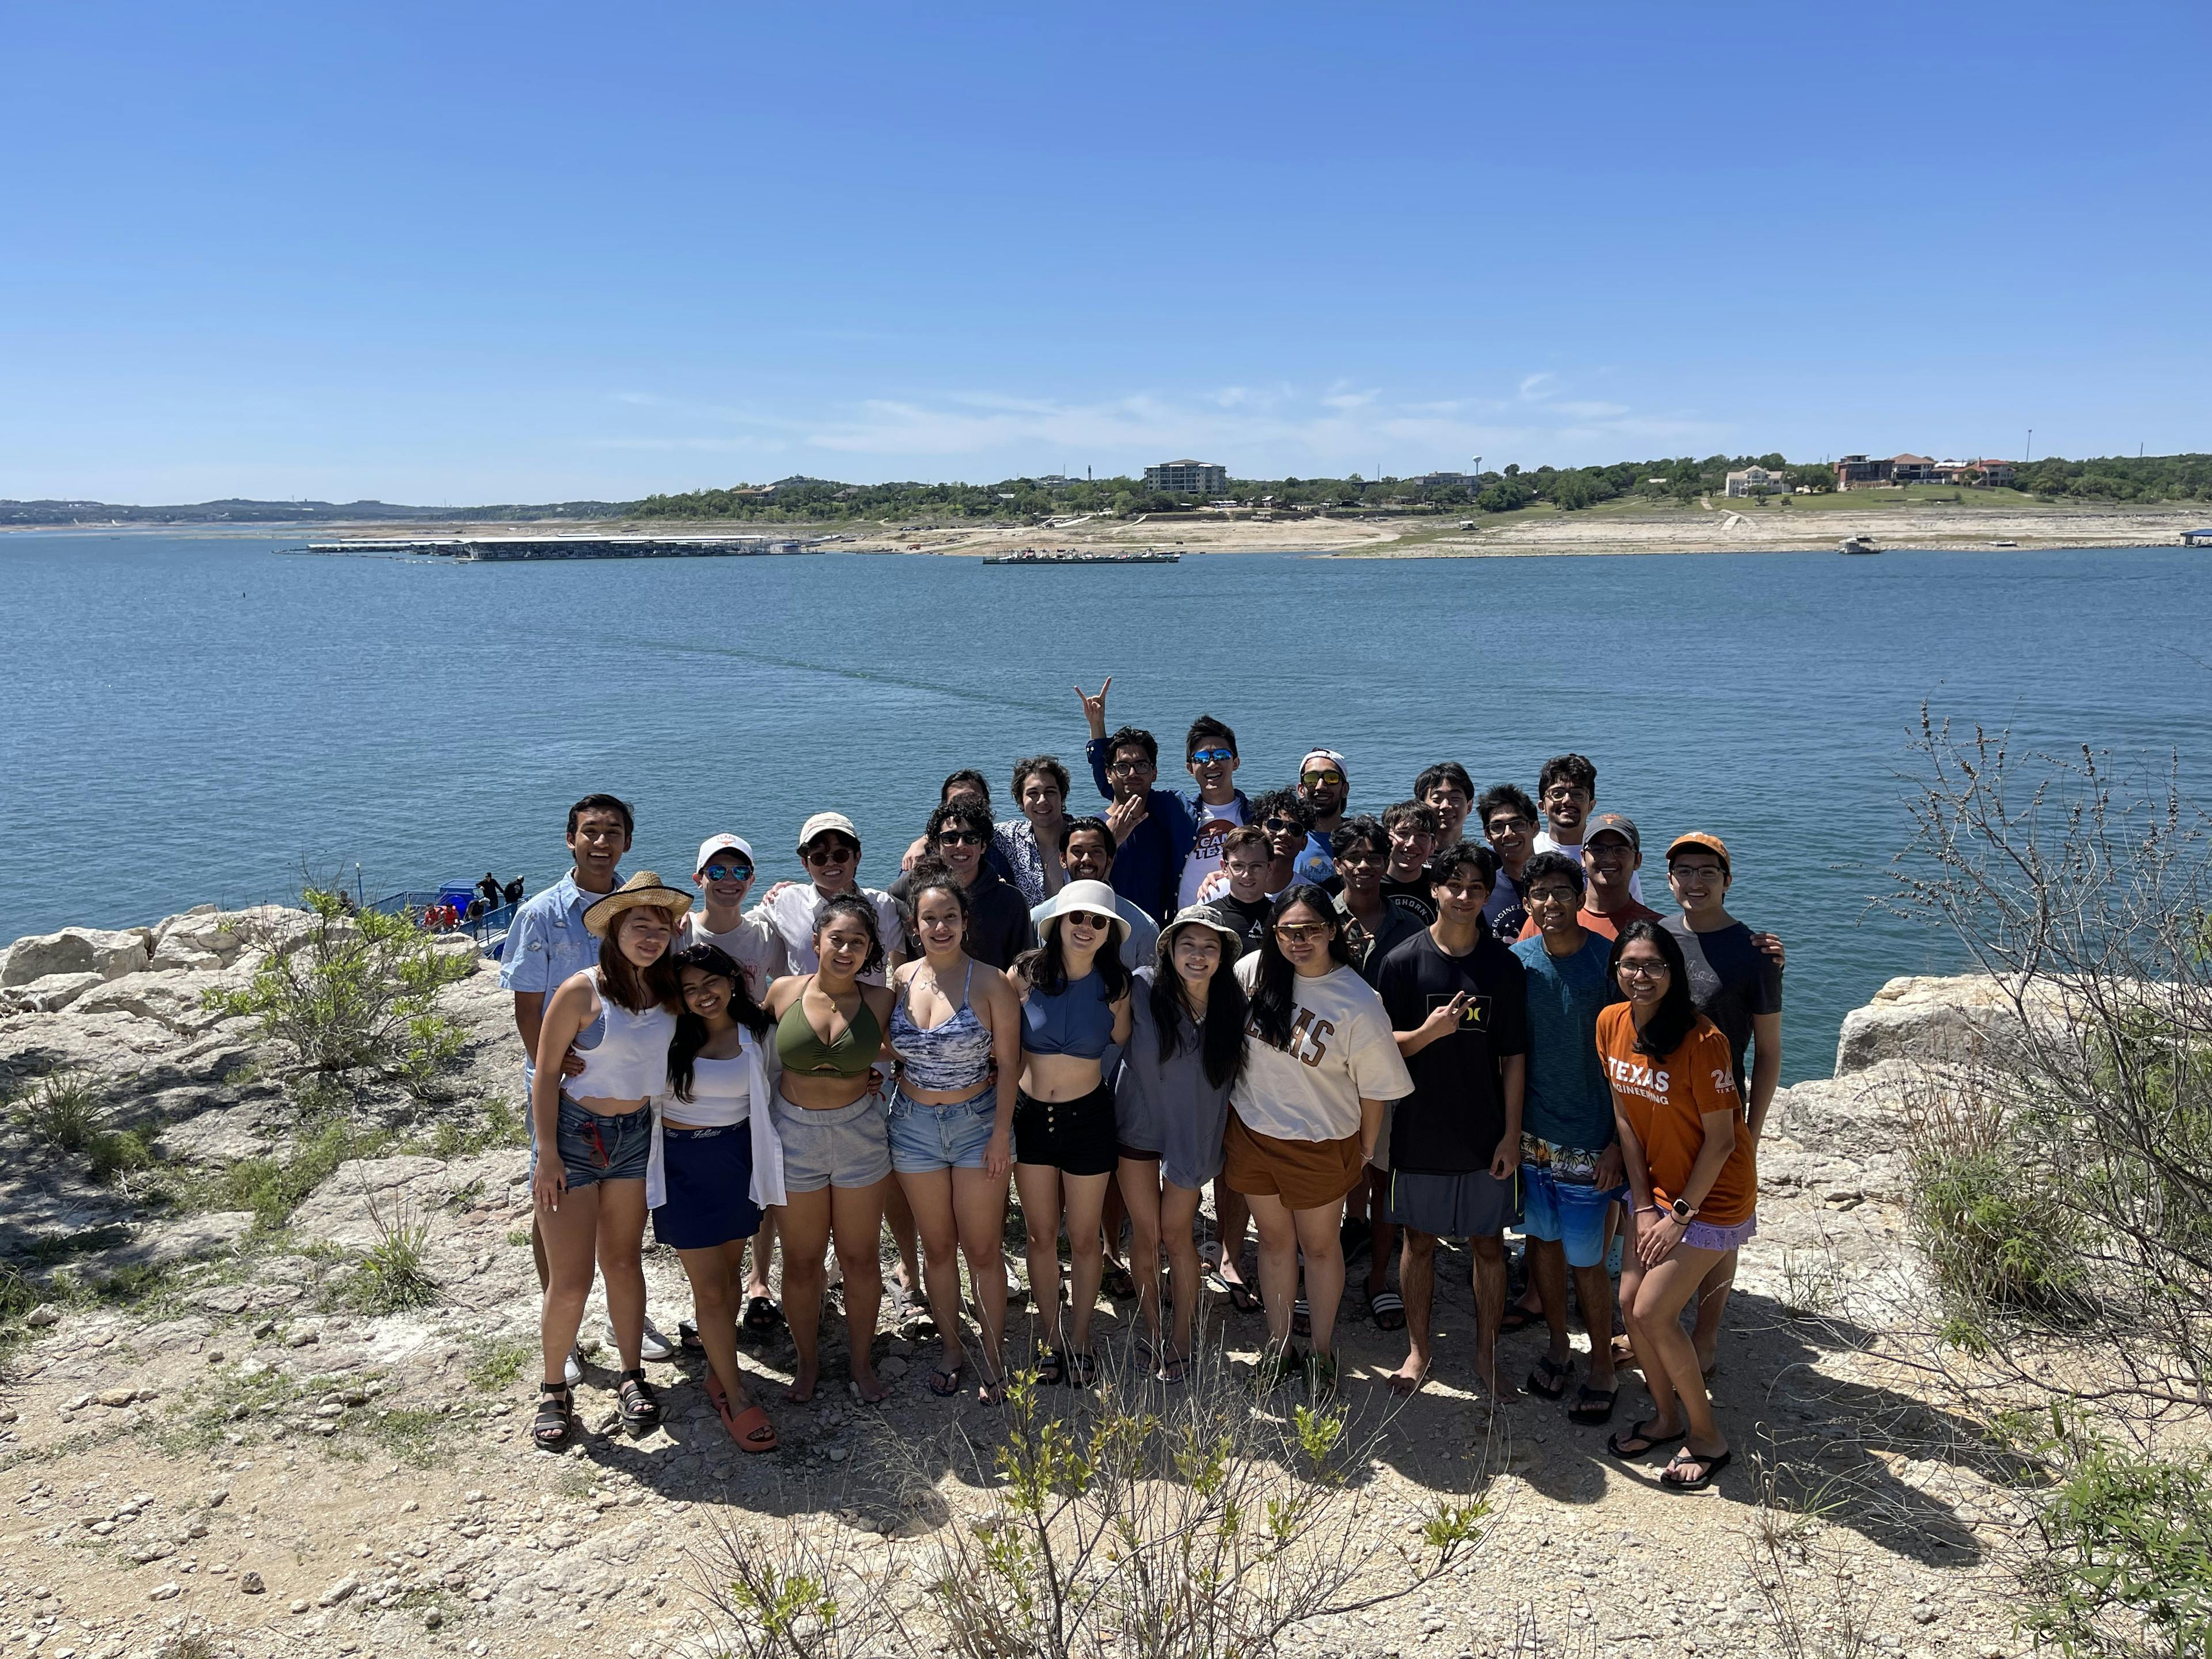 Group photo of IEEE members on rocky hill island in the middle of a lake.